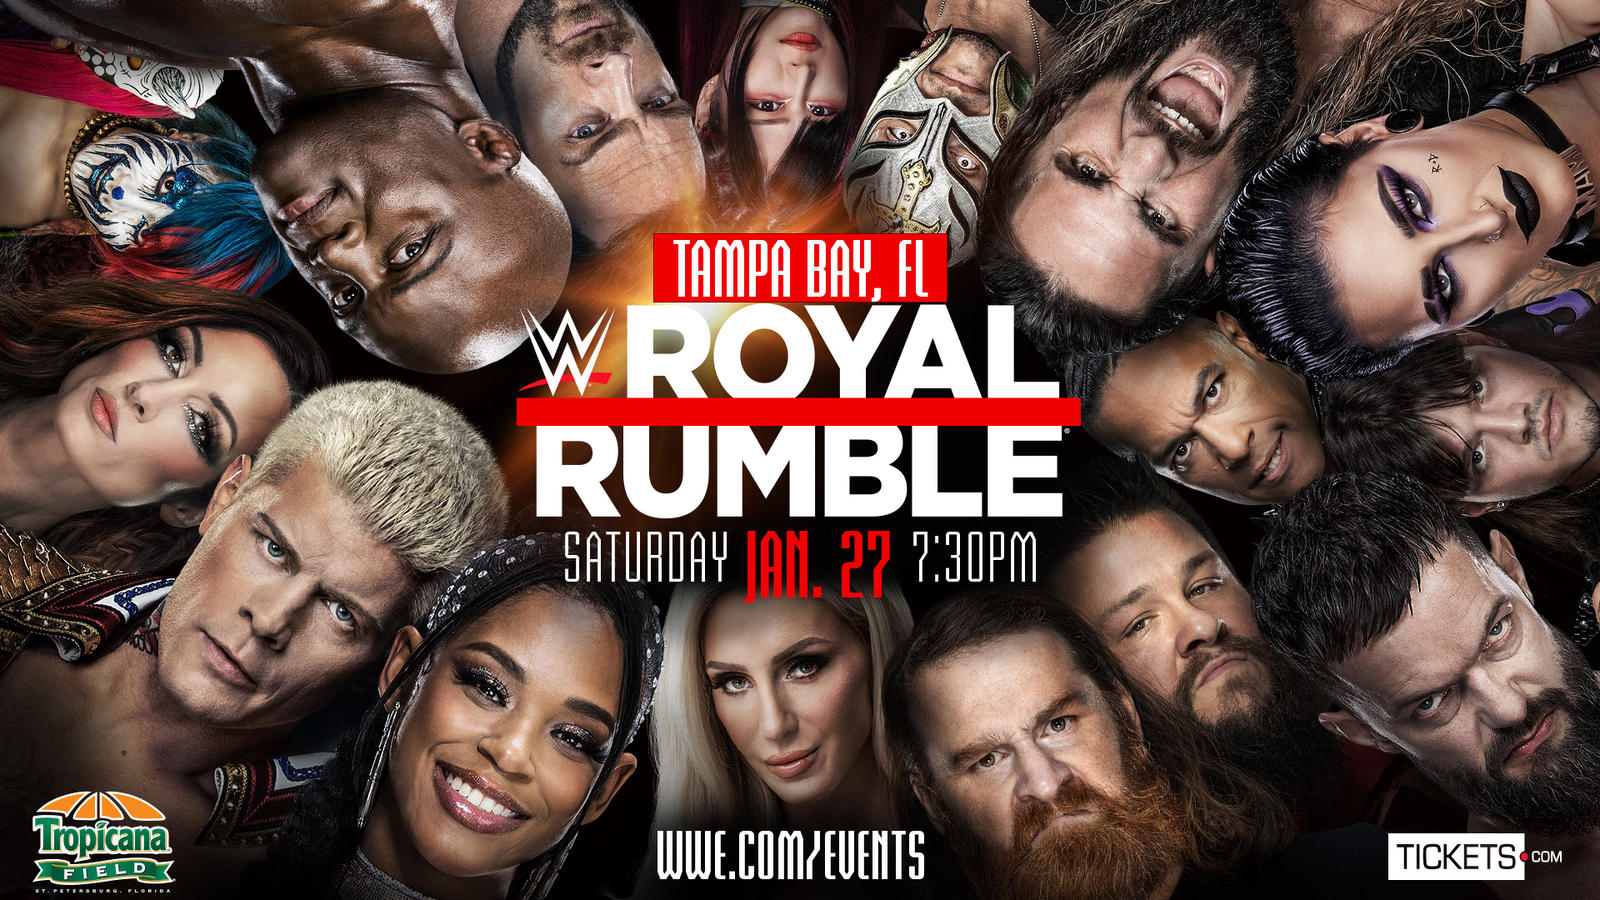 WWE Aims to Break Royal Rumble Records Wrestling Attitude